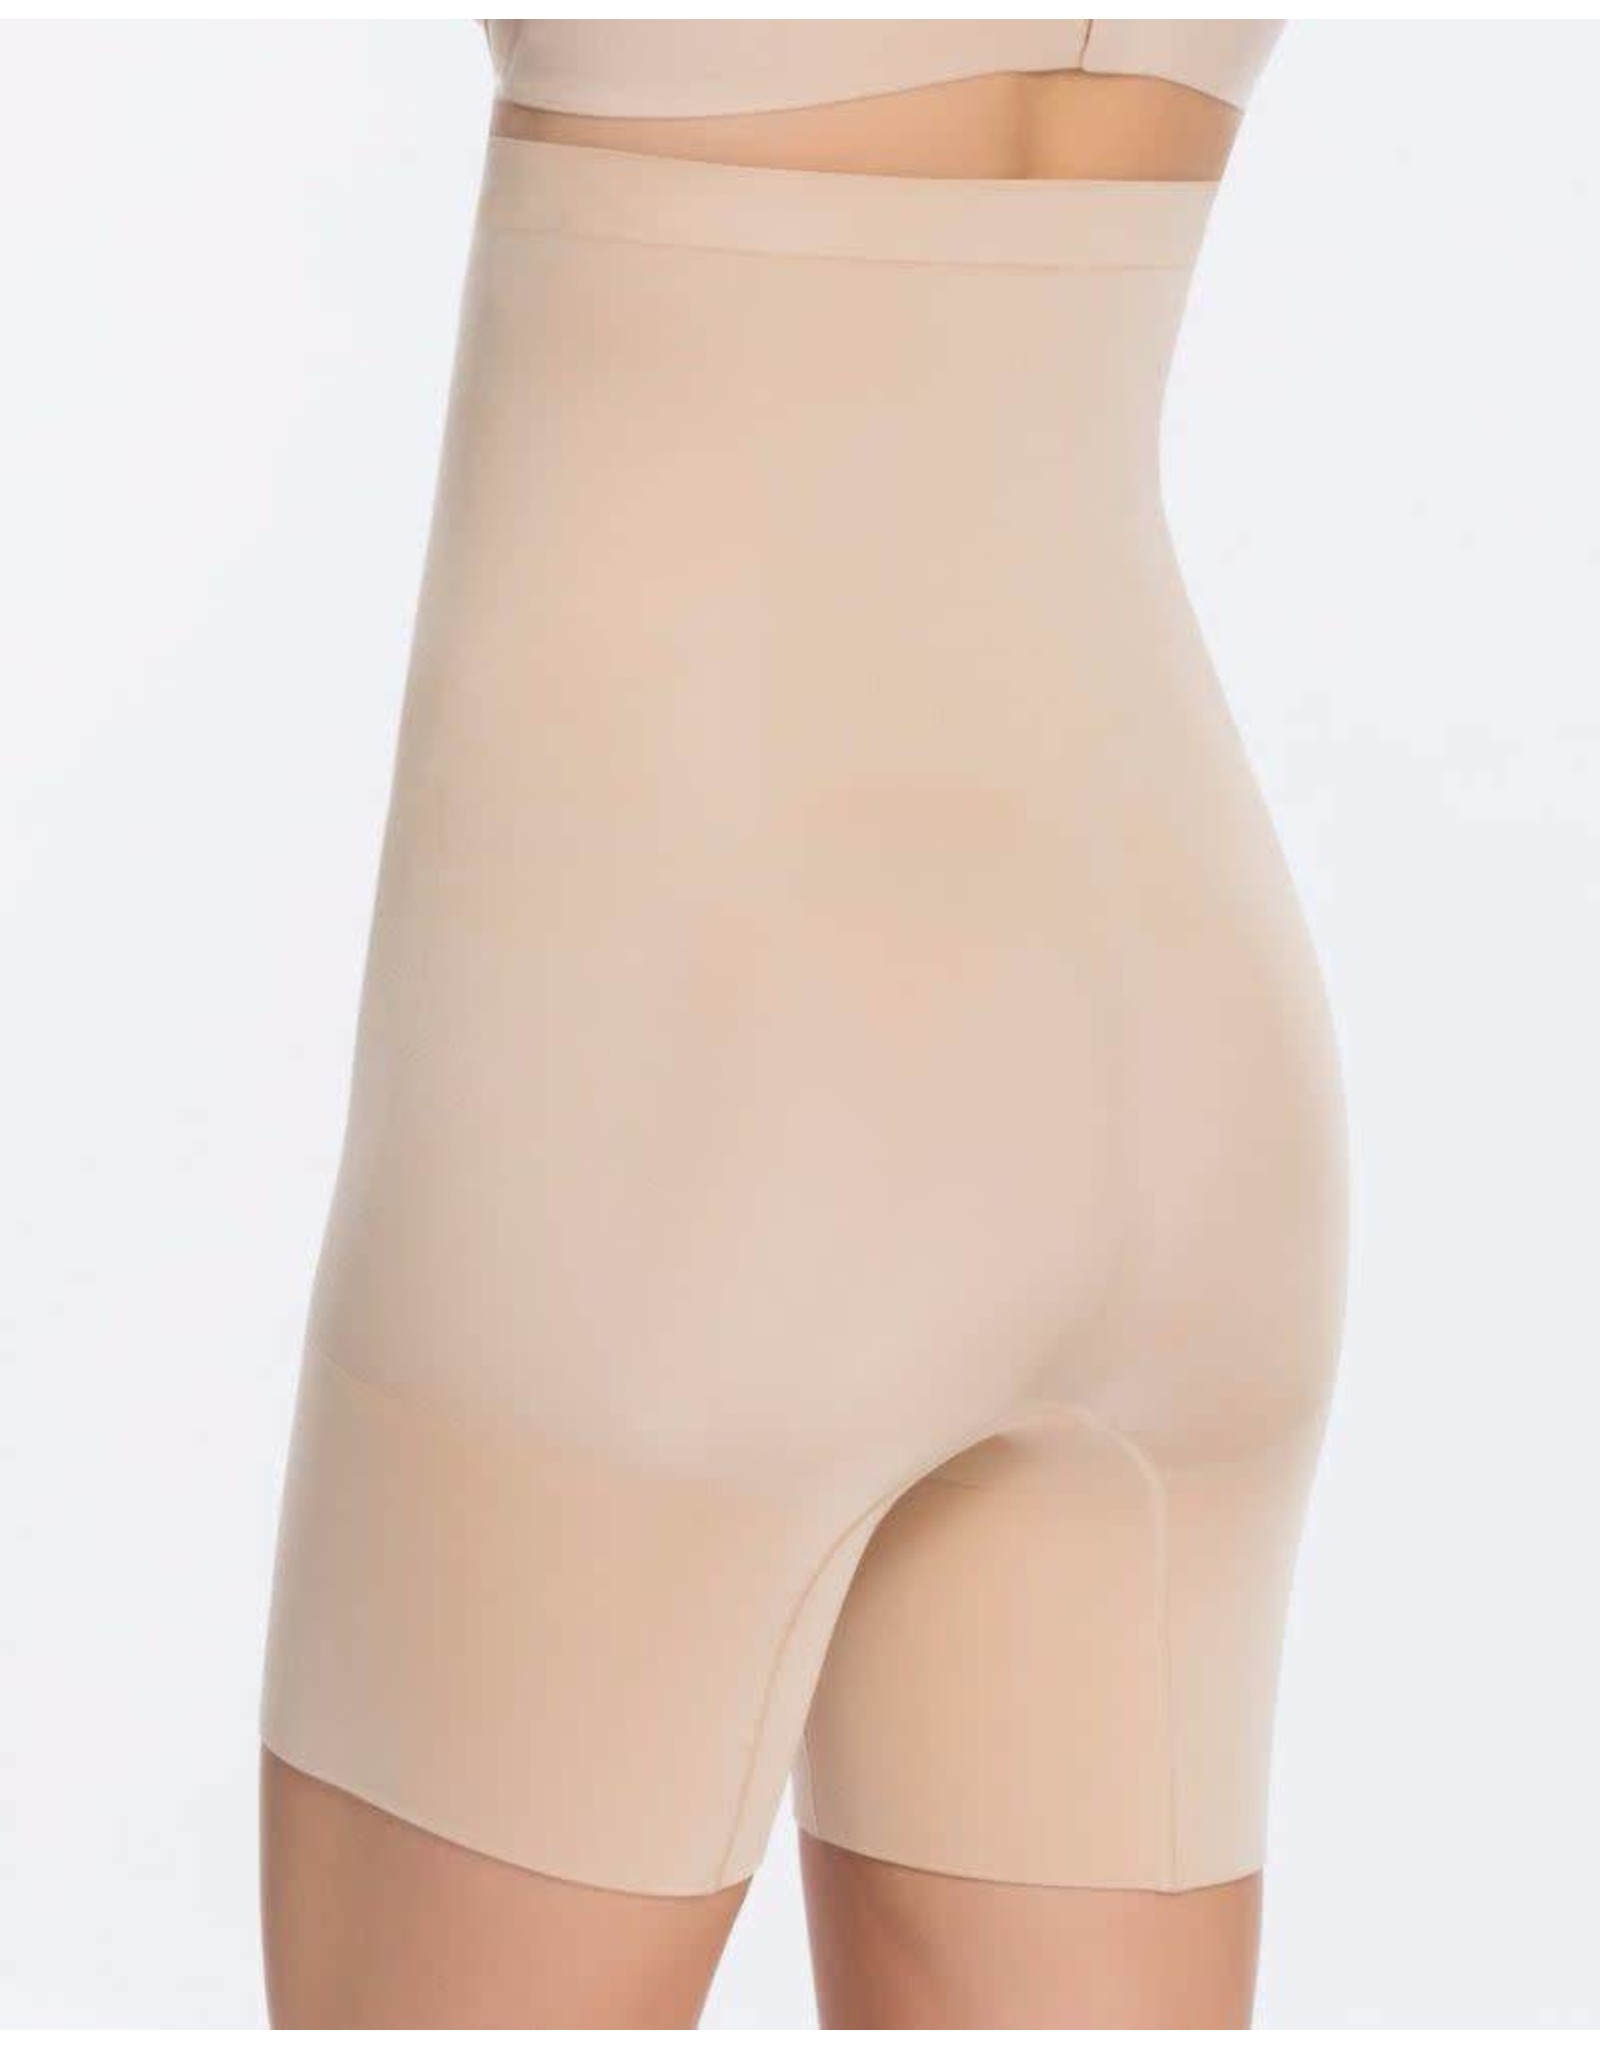 Hudson's bay spanx power conceal her high waist mid thigh shorts